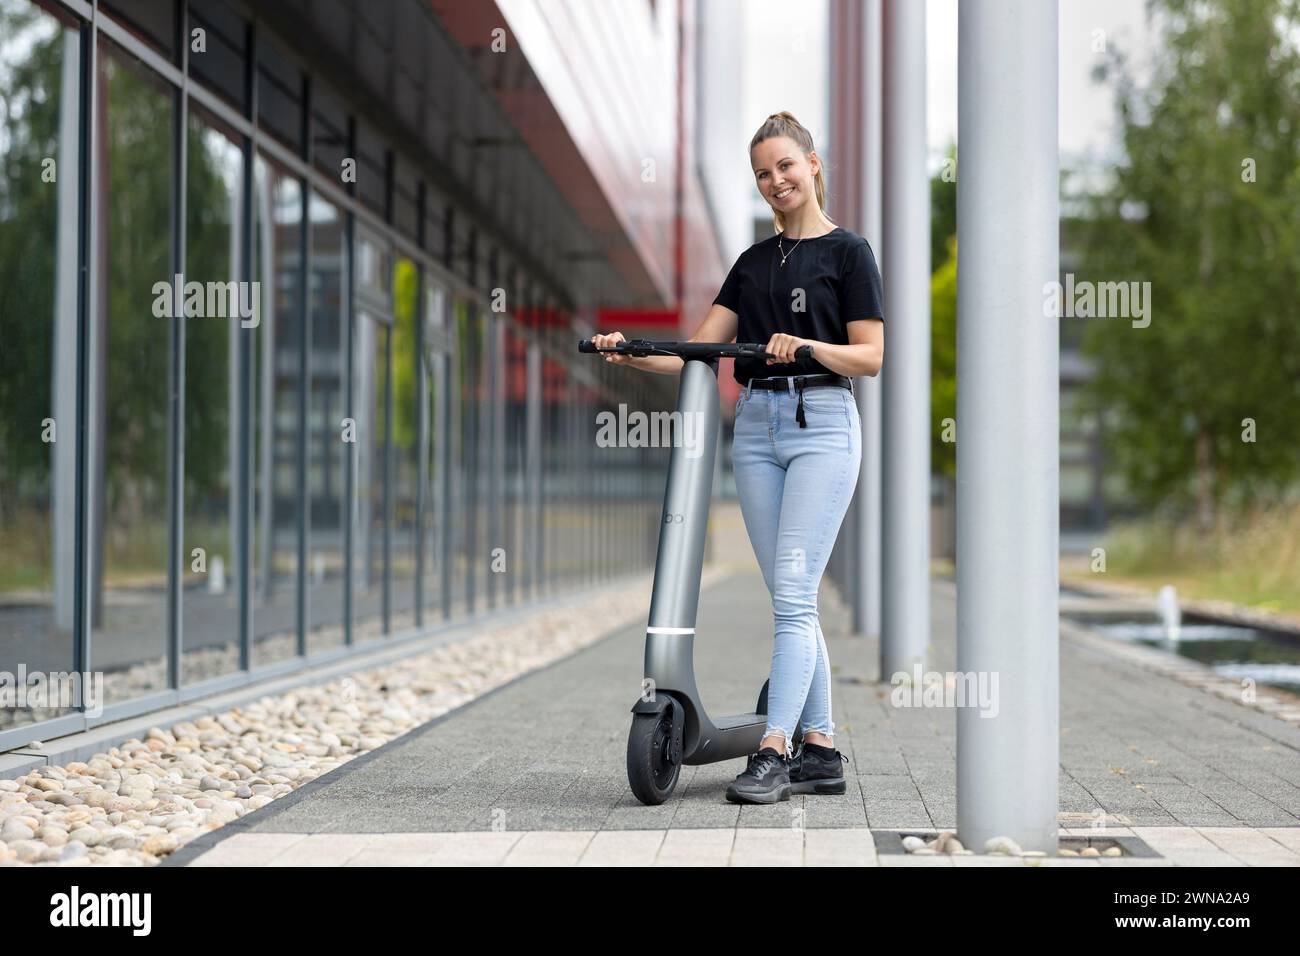 24/07/22  Bristol-based start-up Bo (https://bo.world/) unveils its prototype scooter ‘M’. The electric scooter designed by former Williams F1 and Jag Stock Photo